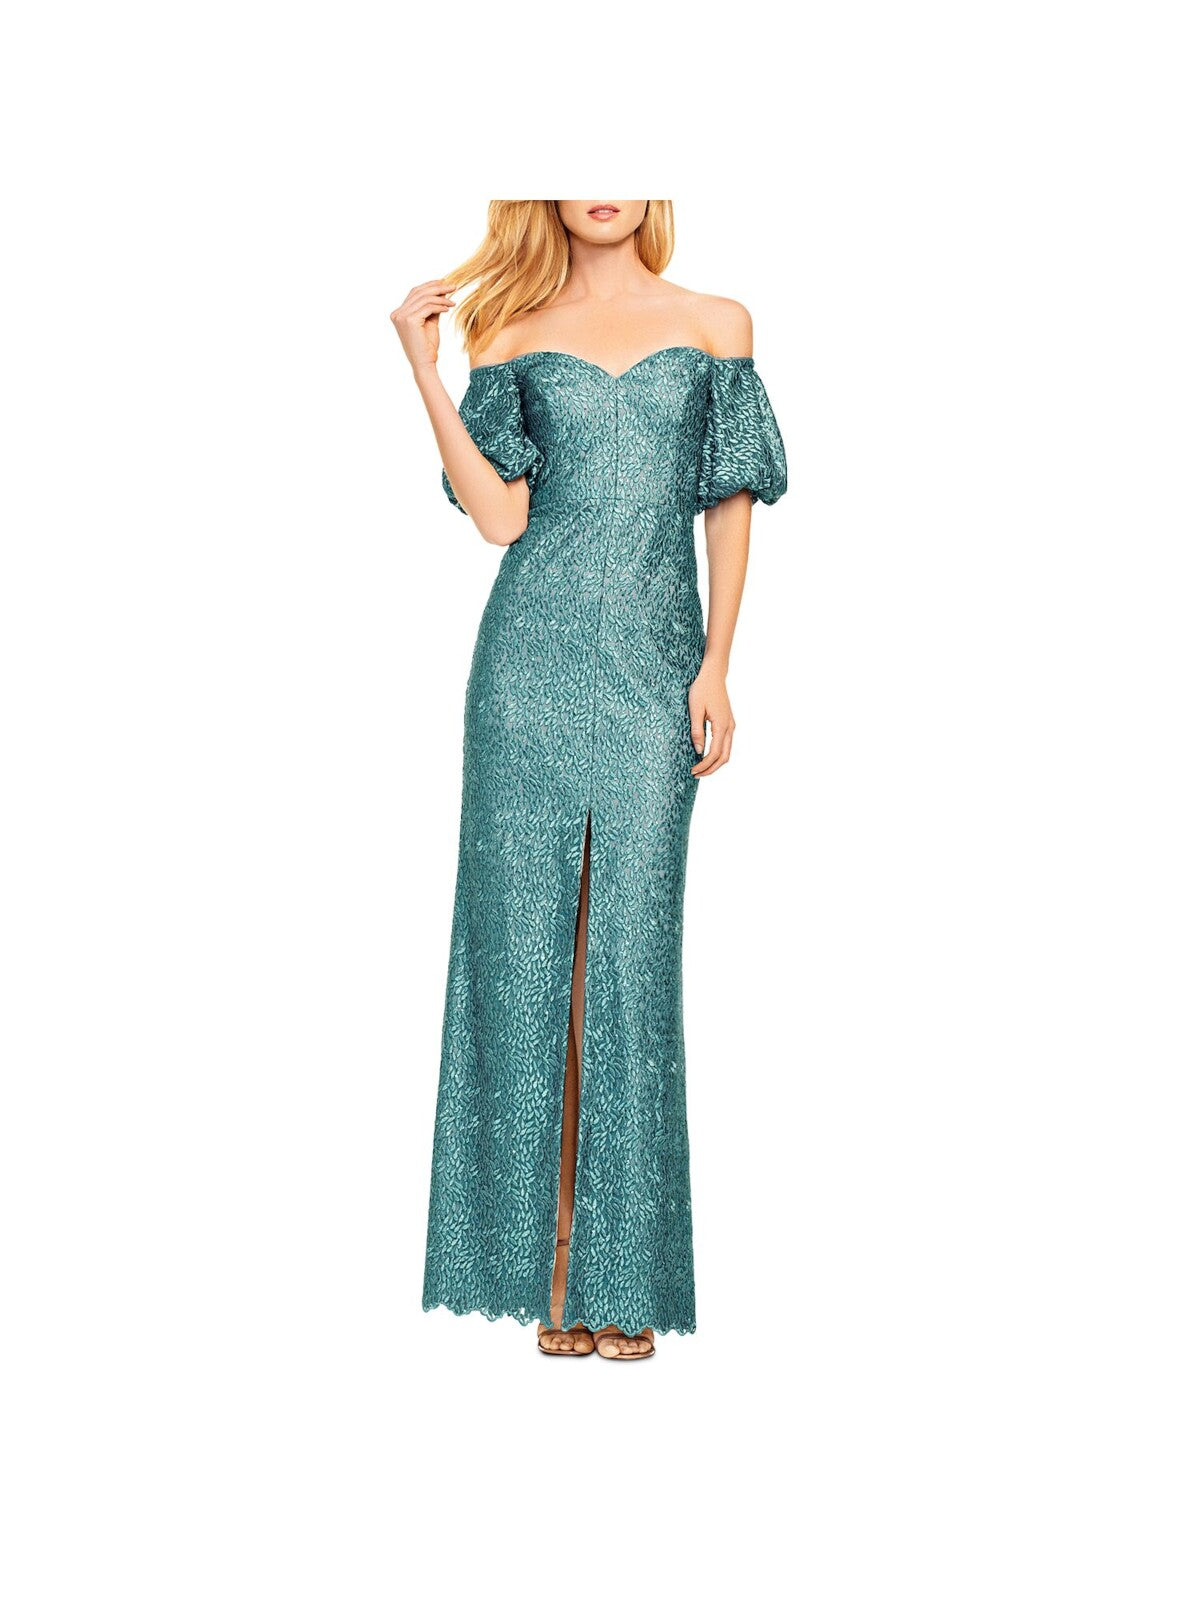 AIDAN MATTOX Womens Teal Lace Embroidered Zippered Slitted Elbow Sleeve Off Shoulder Full-Length Formal Gown Dress 0